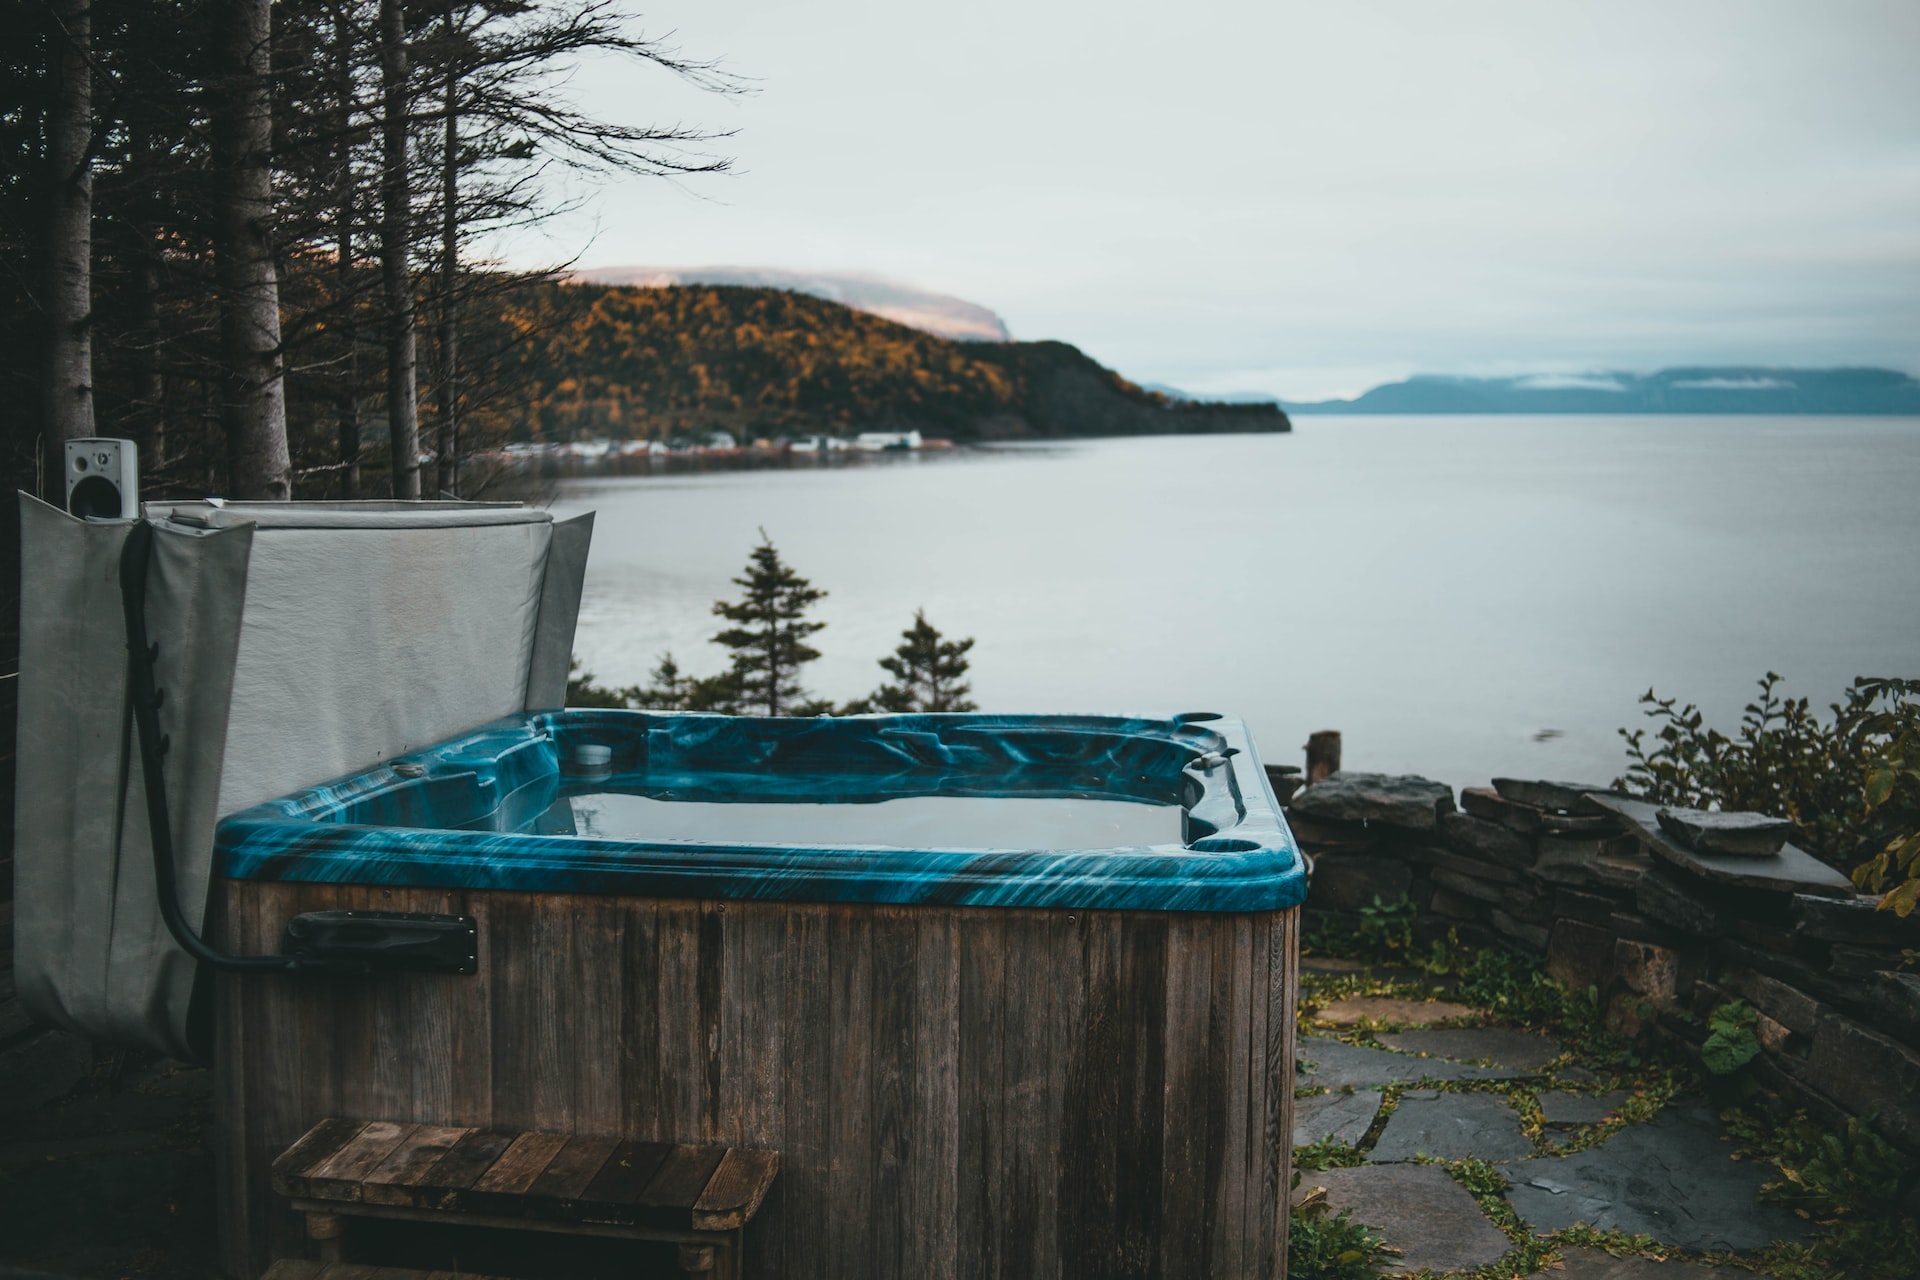 What Are The Requirements For Owning And Maintaining A Hot Tub?